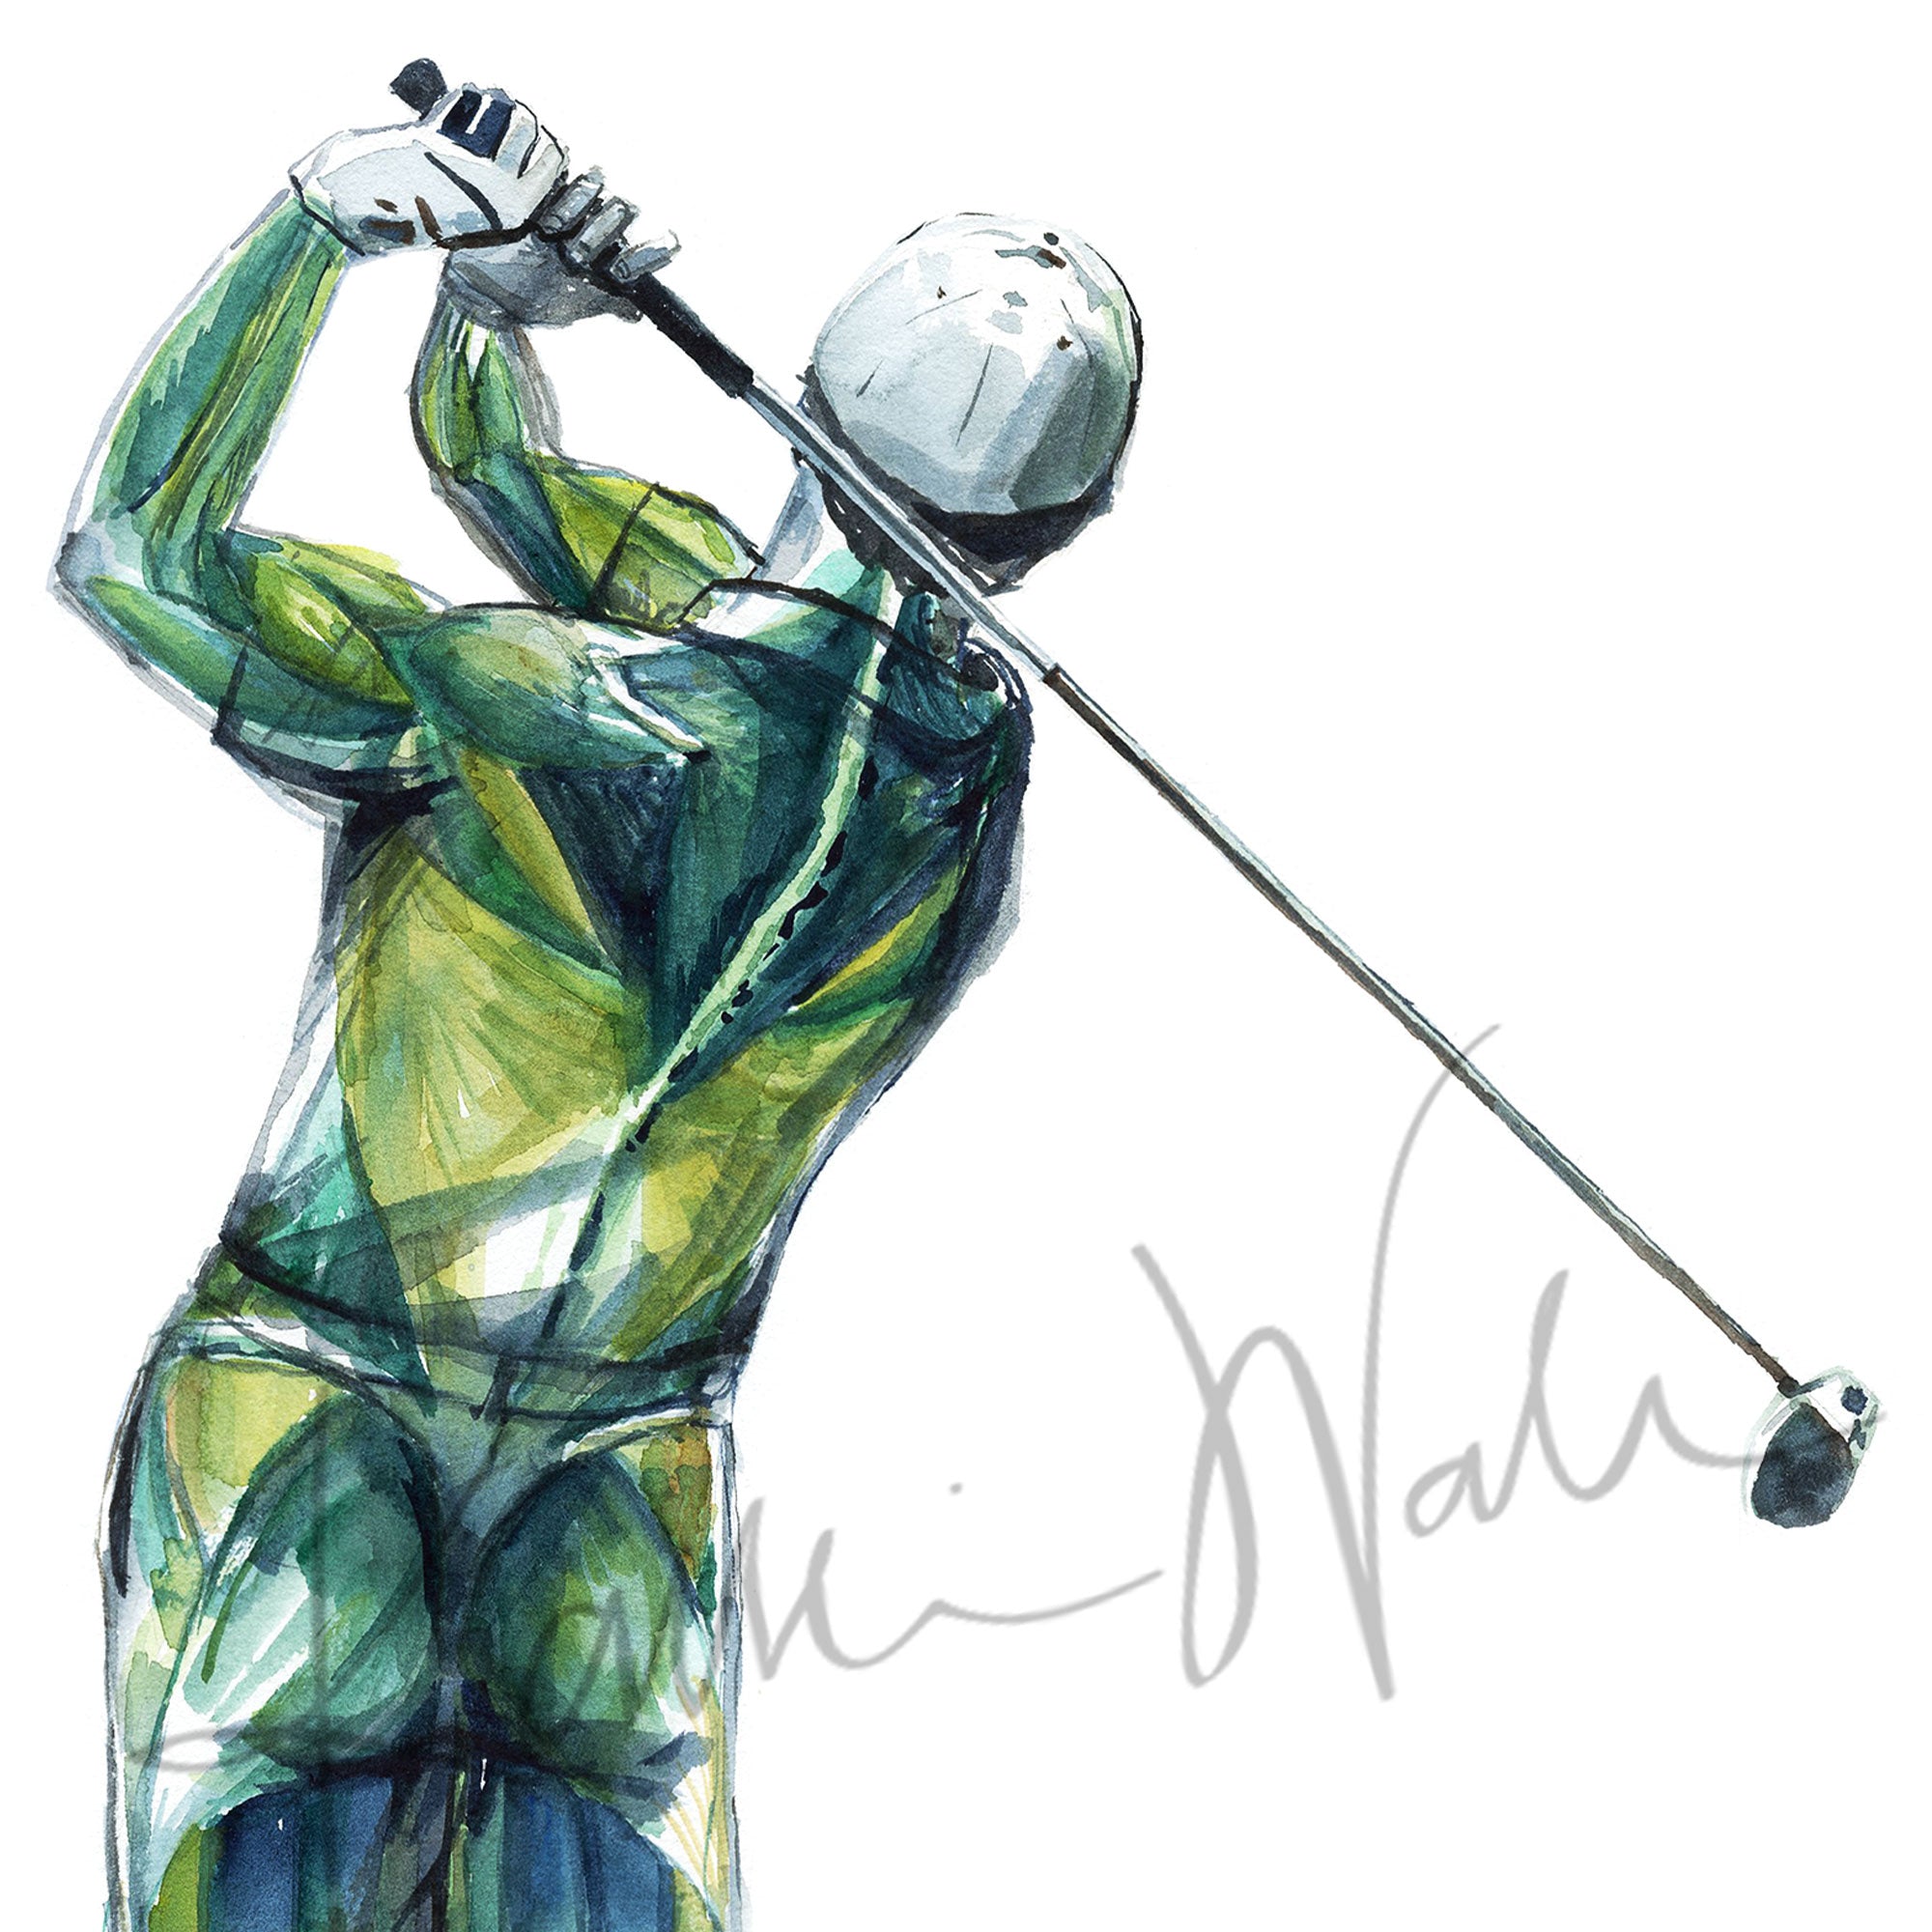 Zoomed in view of a watercolor painting of a golfer’s anatomy during a golf swing.